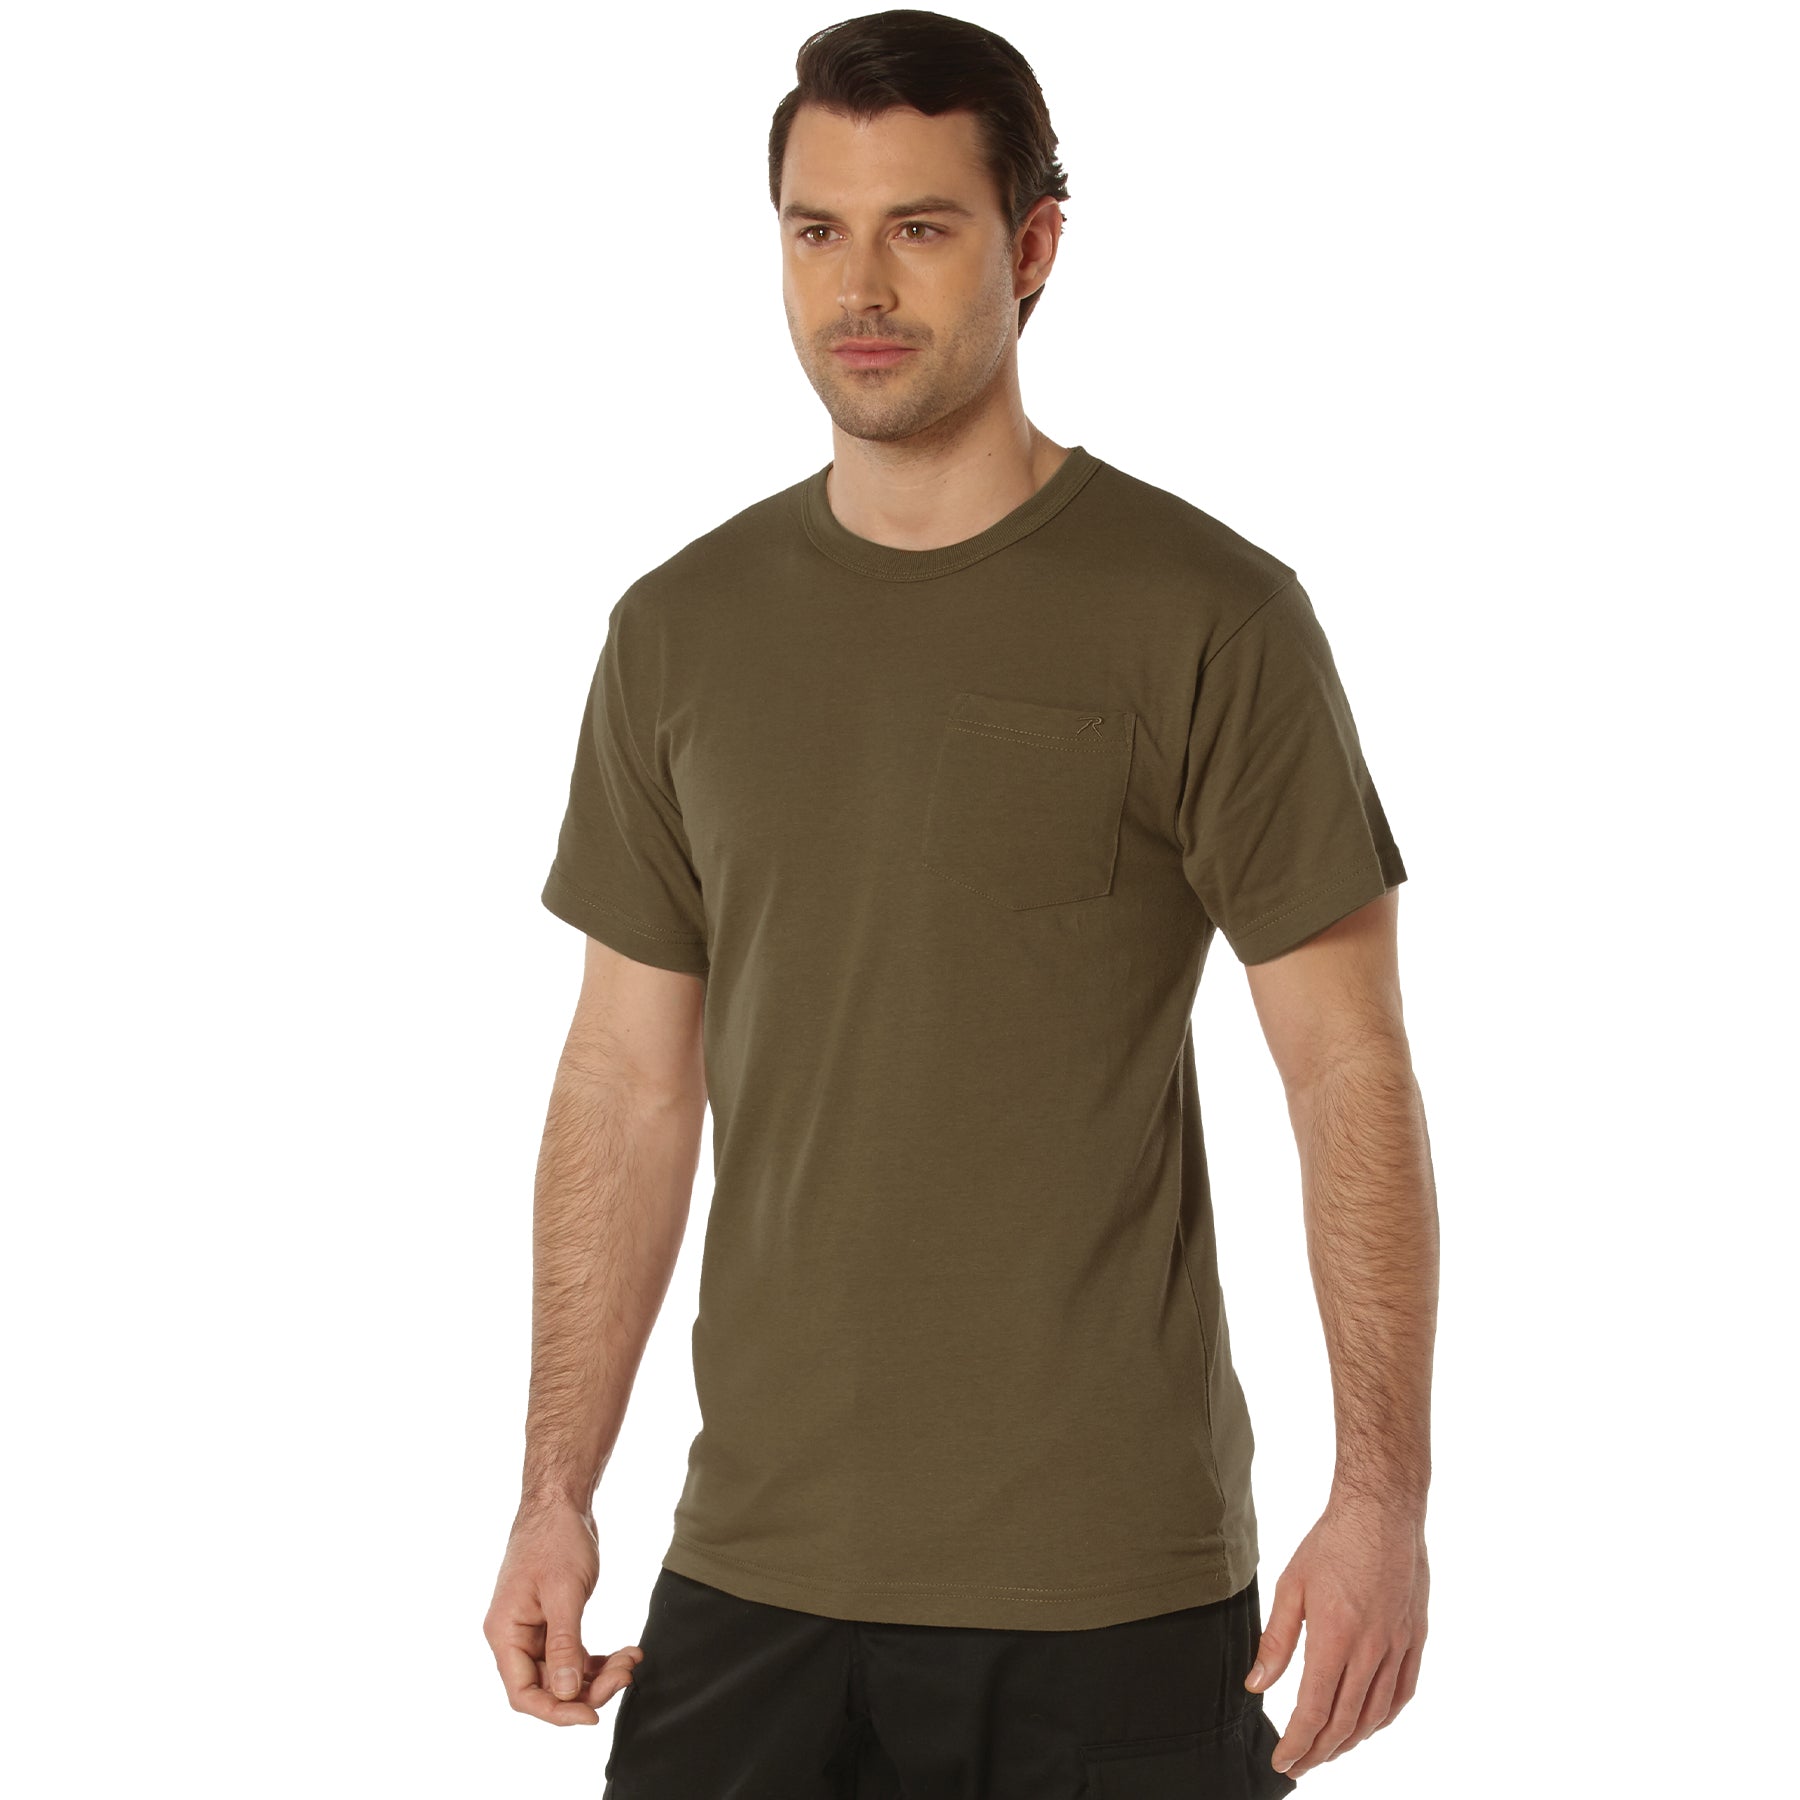 [AR 670-1] Poly/Cotton Pocket T-Shirts Work Brown